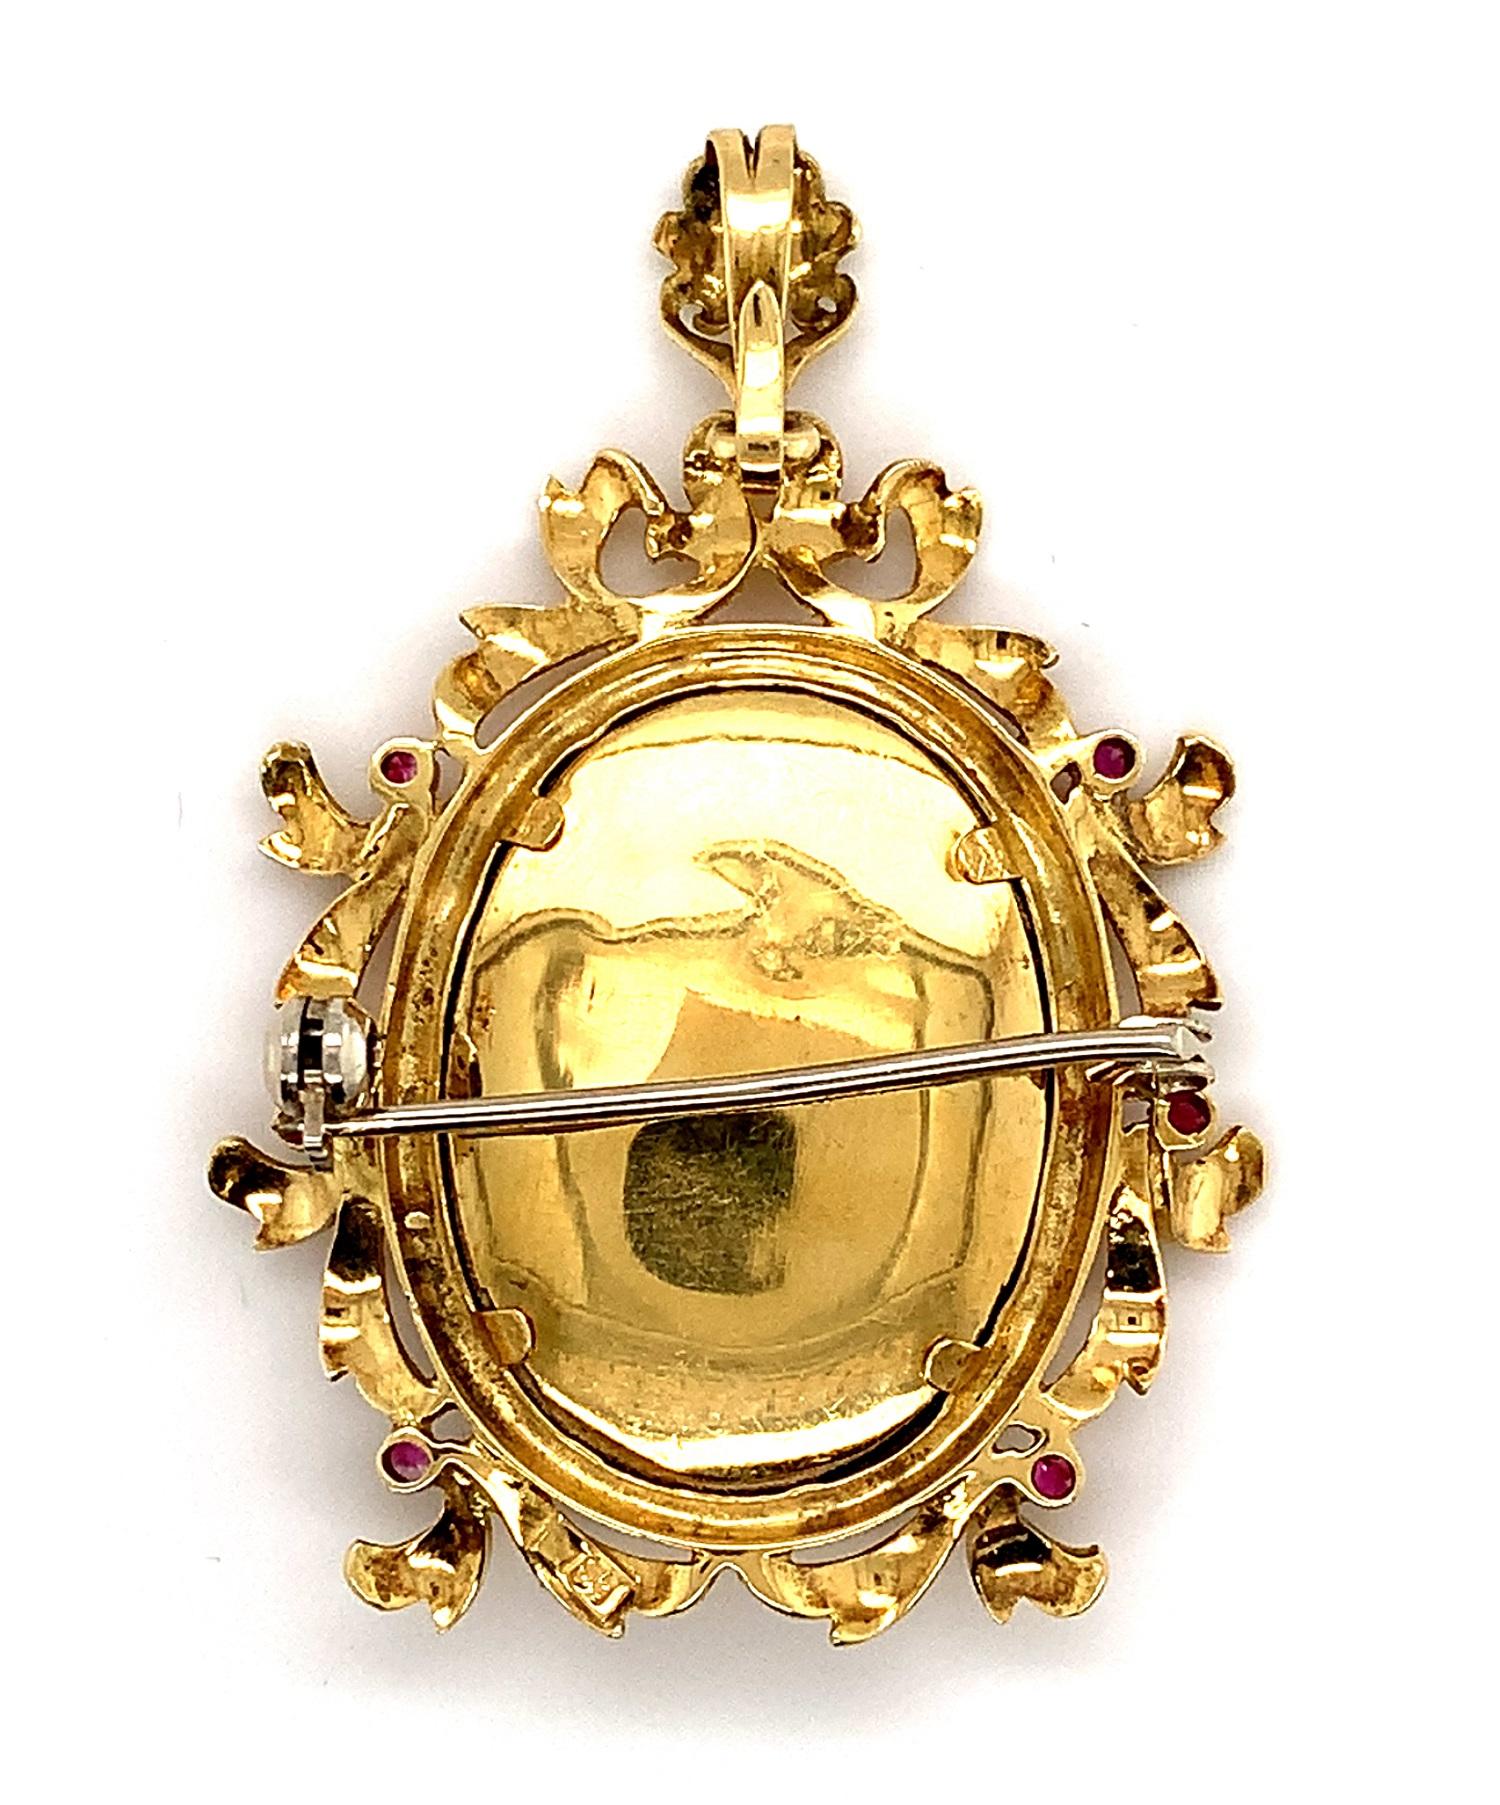 Italian 18k yellow gold hand painted portrait pin or pendant. It features a beautiful oval hand painted portrait based on the Mona Lisa, which is accented with a tiny emerald and 2 small round diamonds. The portrait measures about 1